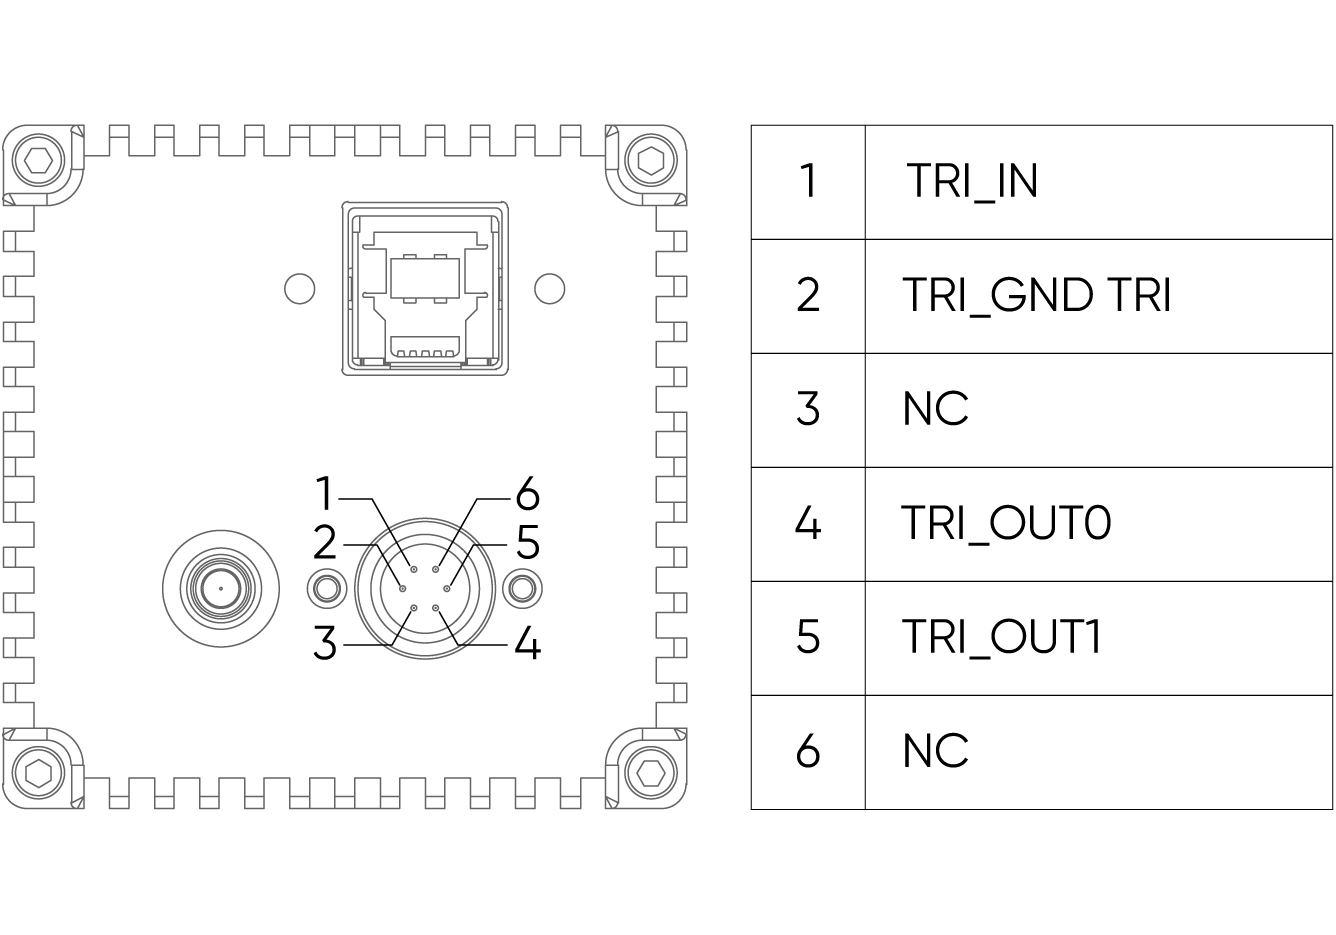 Introduction to setting up triggering for the Dhyana 401D and FL20-BW